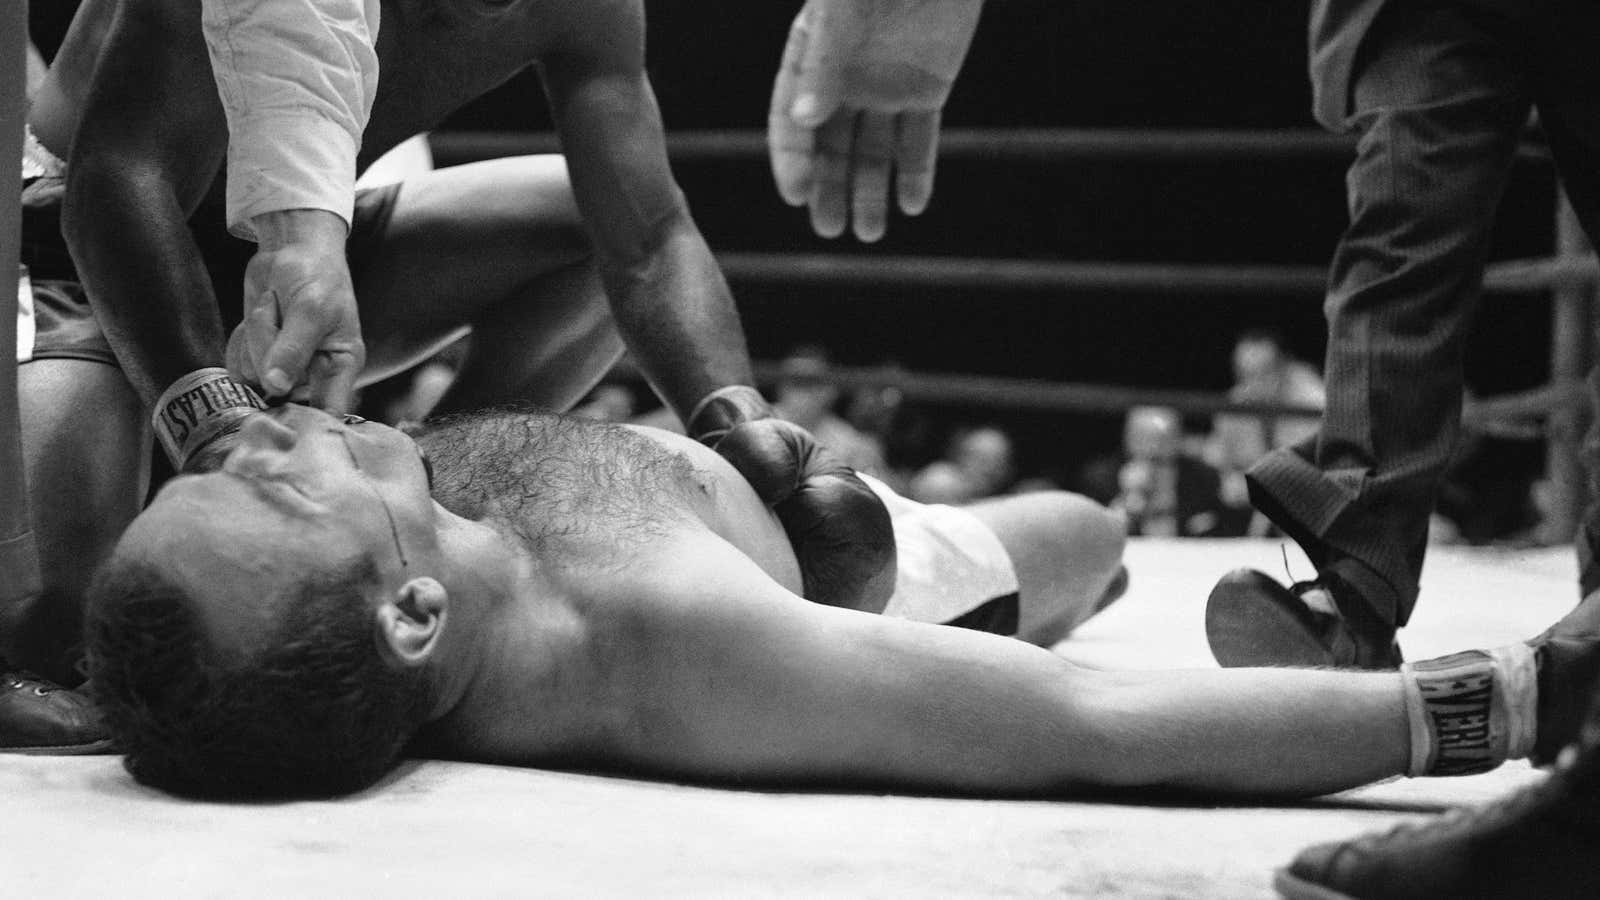 Ingemar Johansson failed to regain consciousness for several minutes after getting knocked out in a 1960 fight.